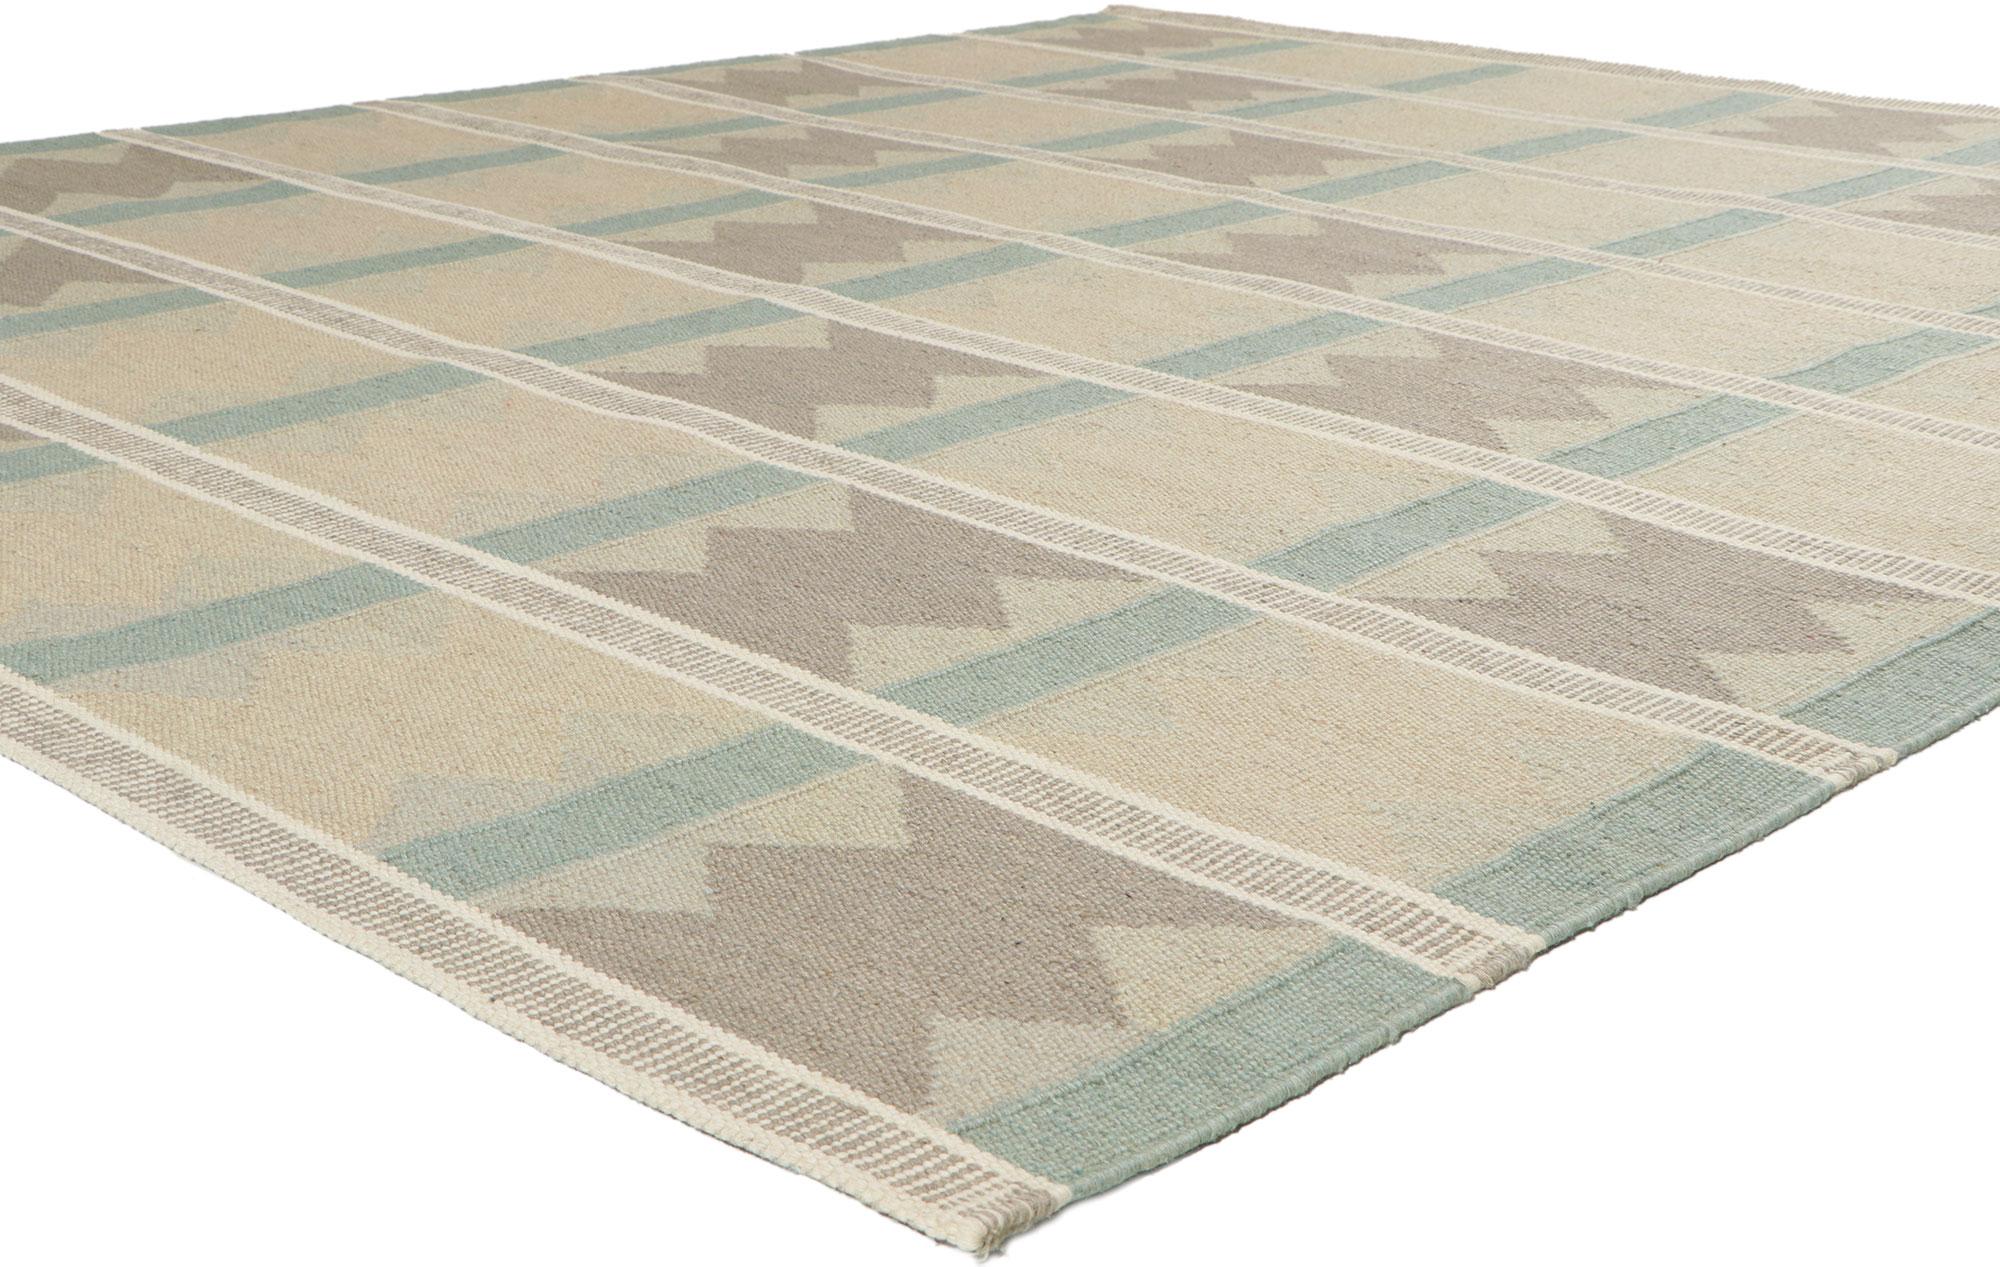 30847 ?New Swedish Ingegerd Silow Inspired Kilim rug with Scandinavian Modern Style 08'03 x 09'07. With its simplicity, geometric design and soft colors, this hand-woven wool Swedish inspired Kilim rug provides a feeling of cozy contentment without